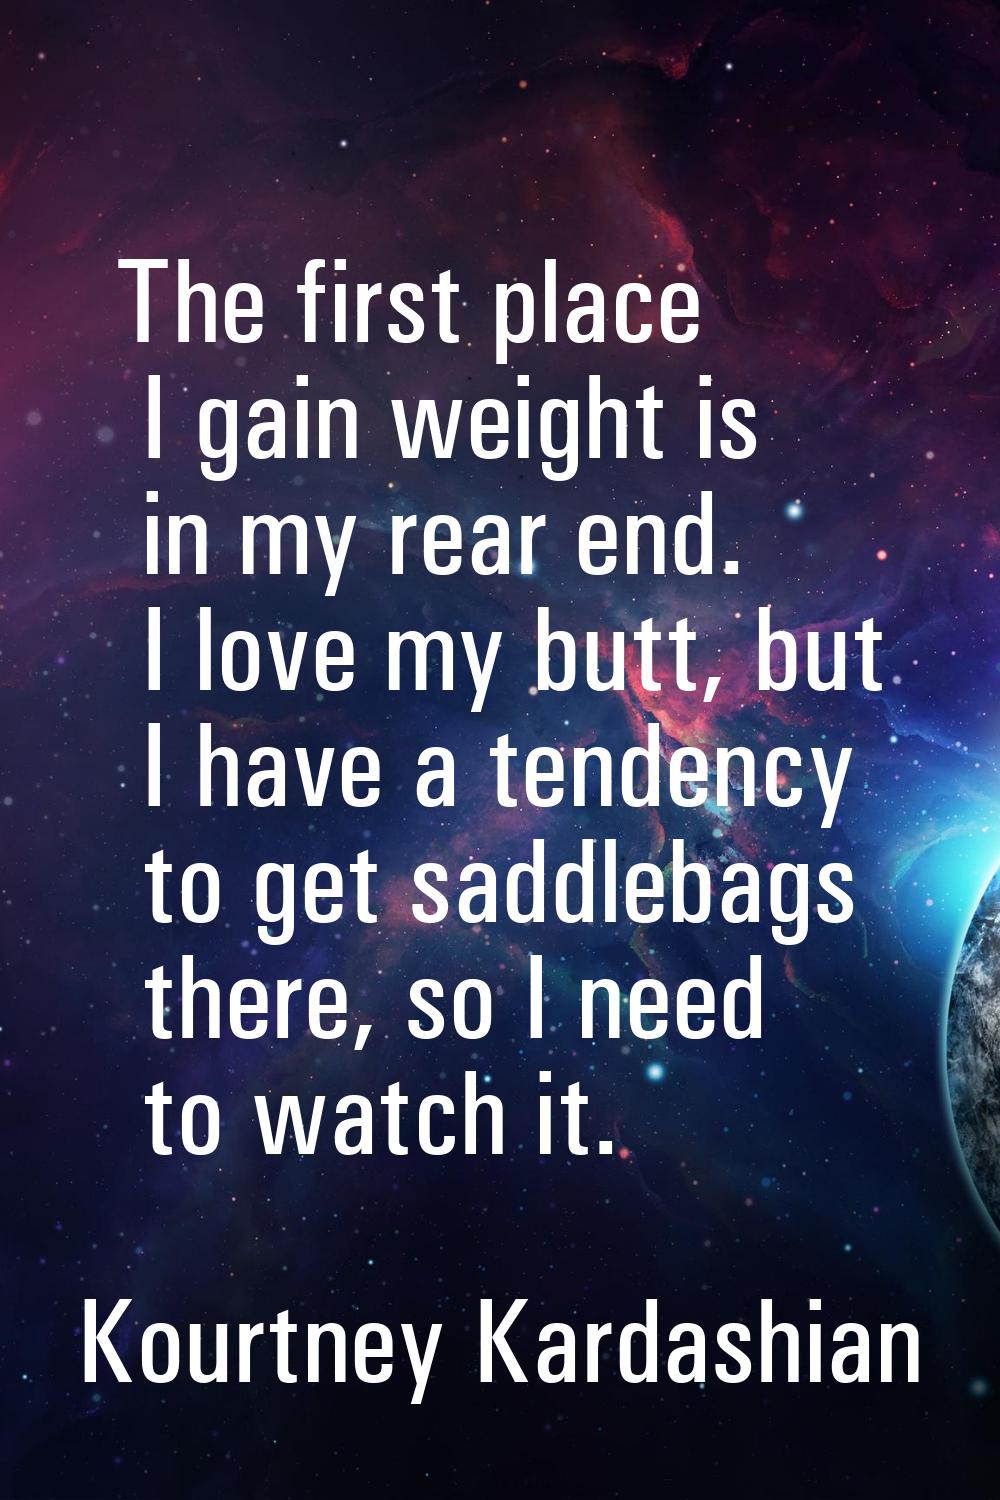 The first place I gain weight is in my rear end. I love my butt, but I have a tendency to get saddl